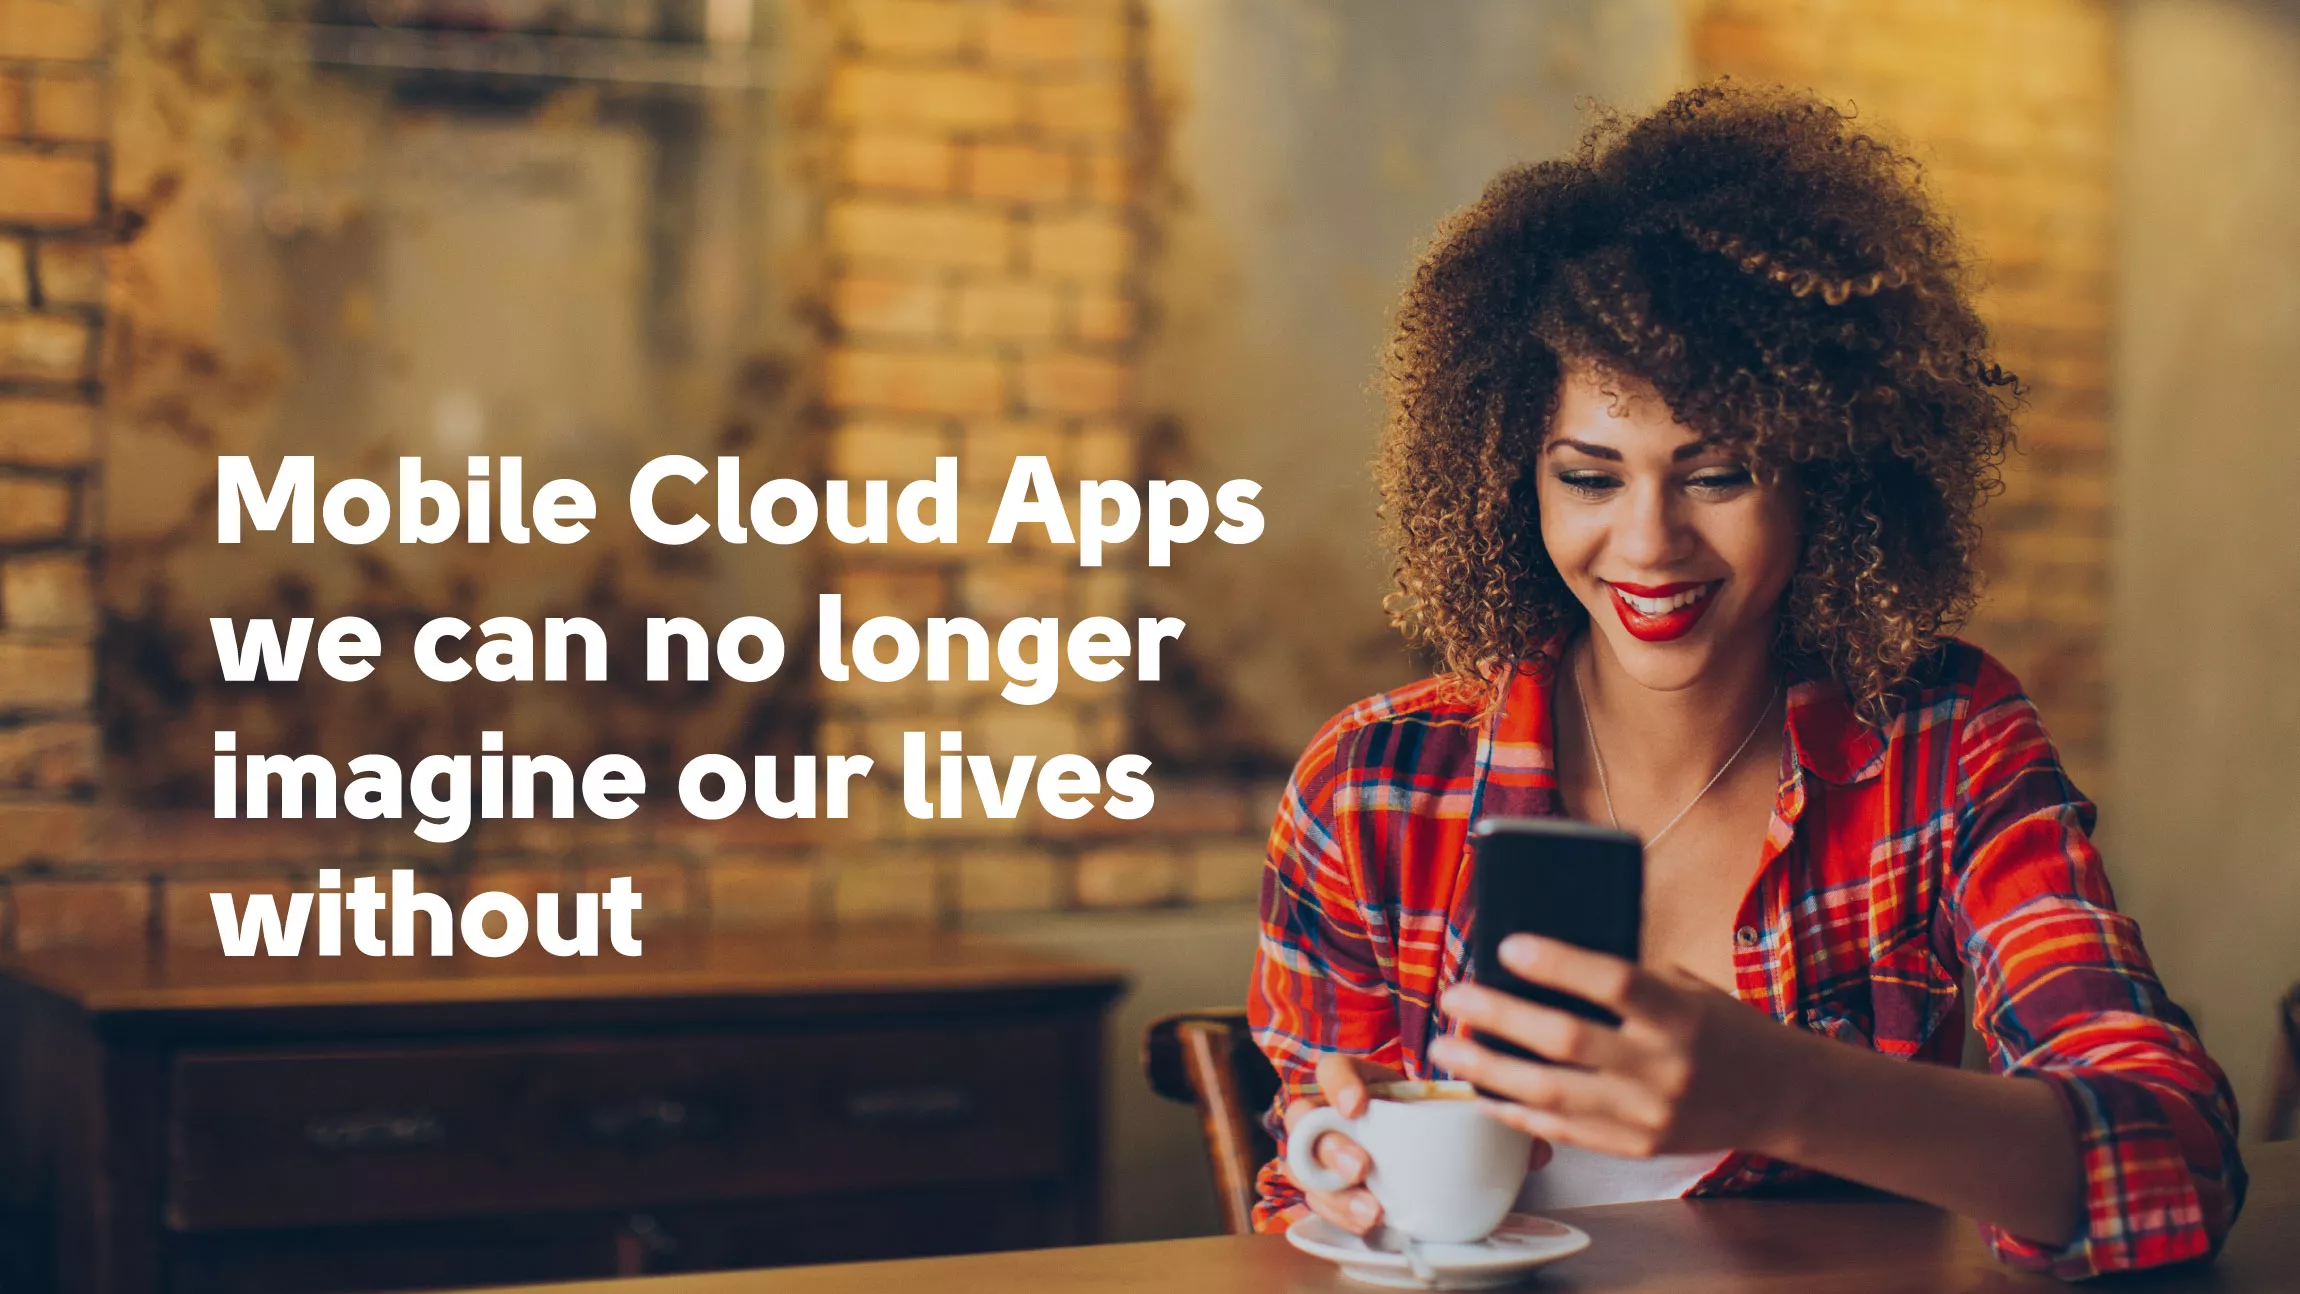 Mobile Cloud Apps and Cloud-Based Solutions We Can No Longer Imagine Our Lives Without